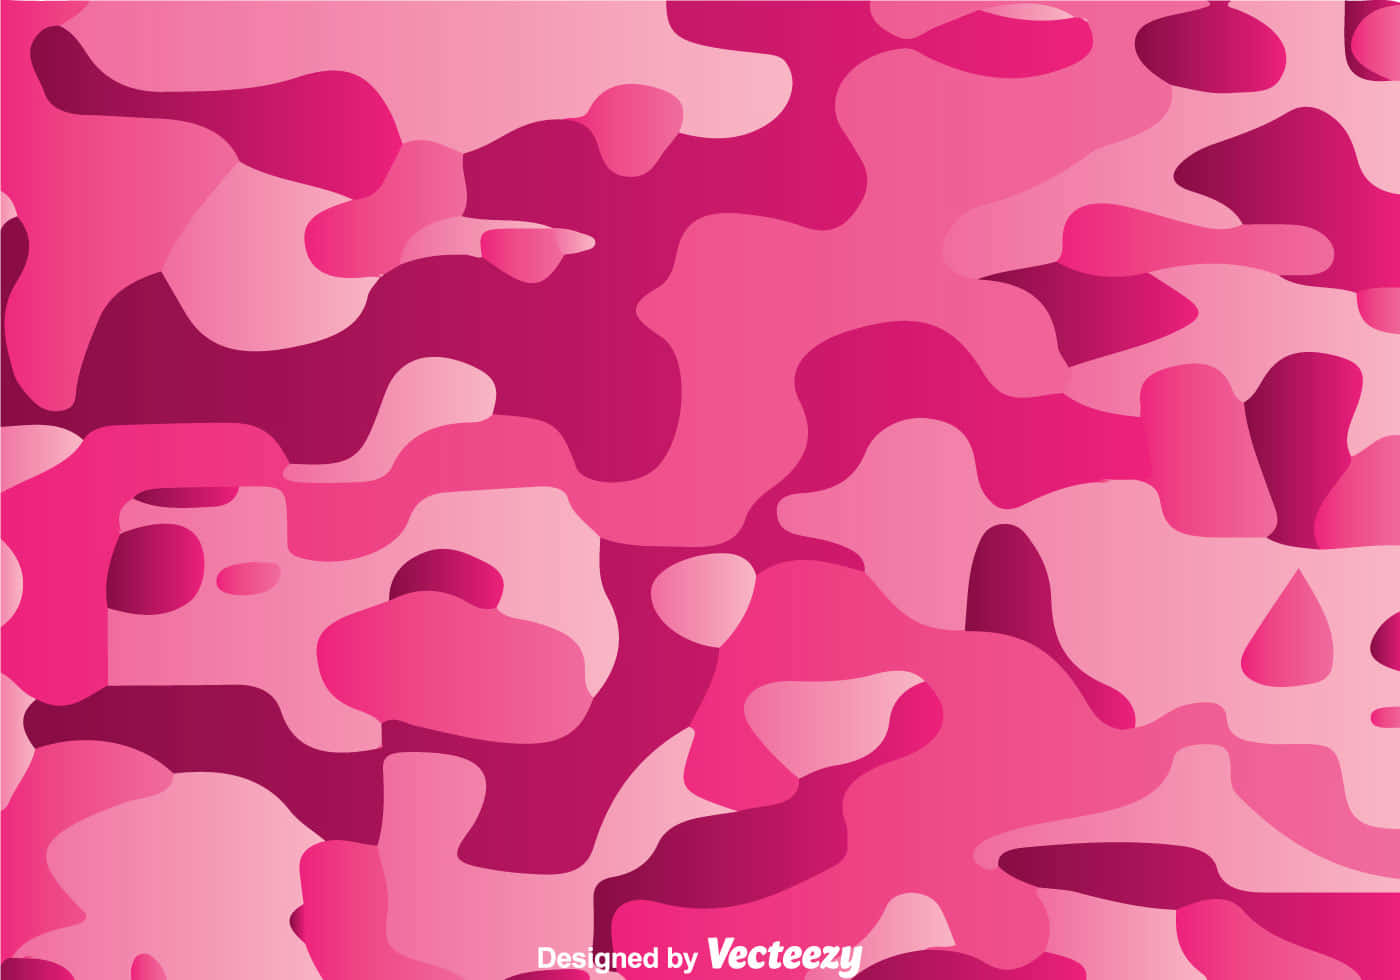 Camouflage yourself in stylized comfort with Pink Camo. Wallpaper